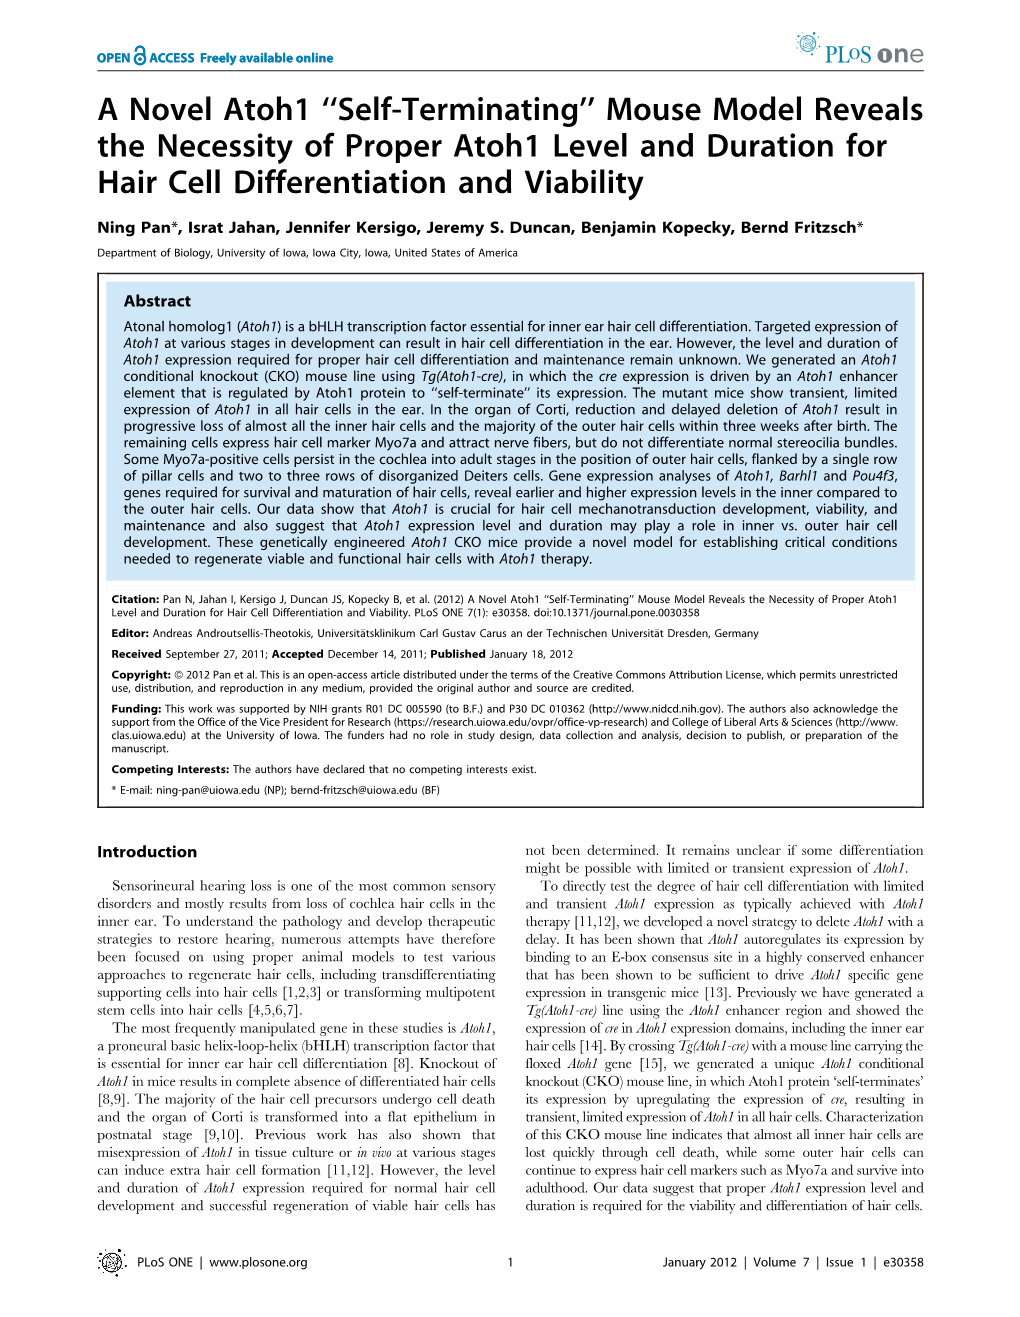 Mouse Model Reveals the Necessity of Proper Atoh1 Level and Duration for Hair Cell Differentiation and Viability